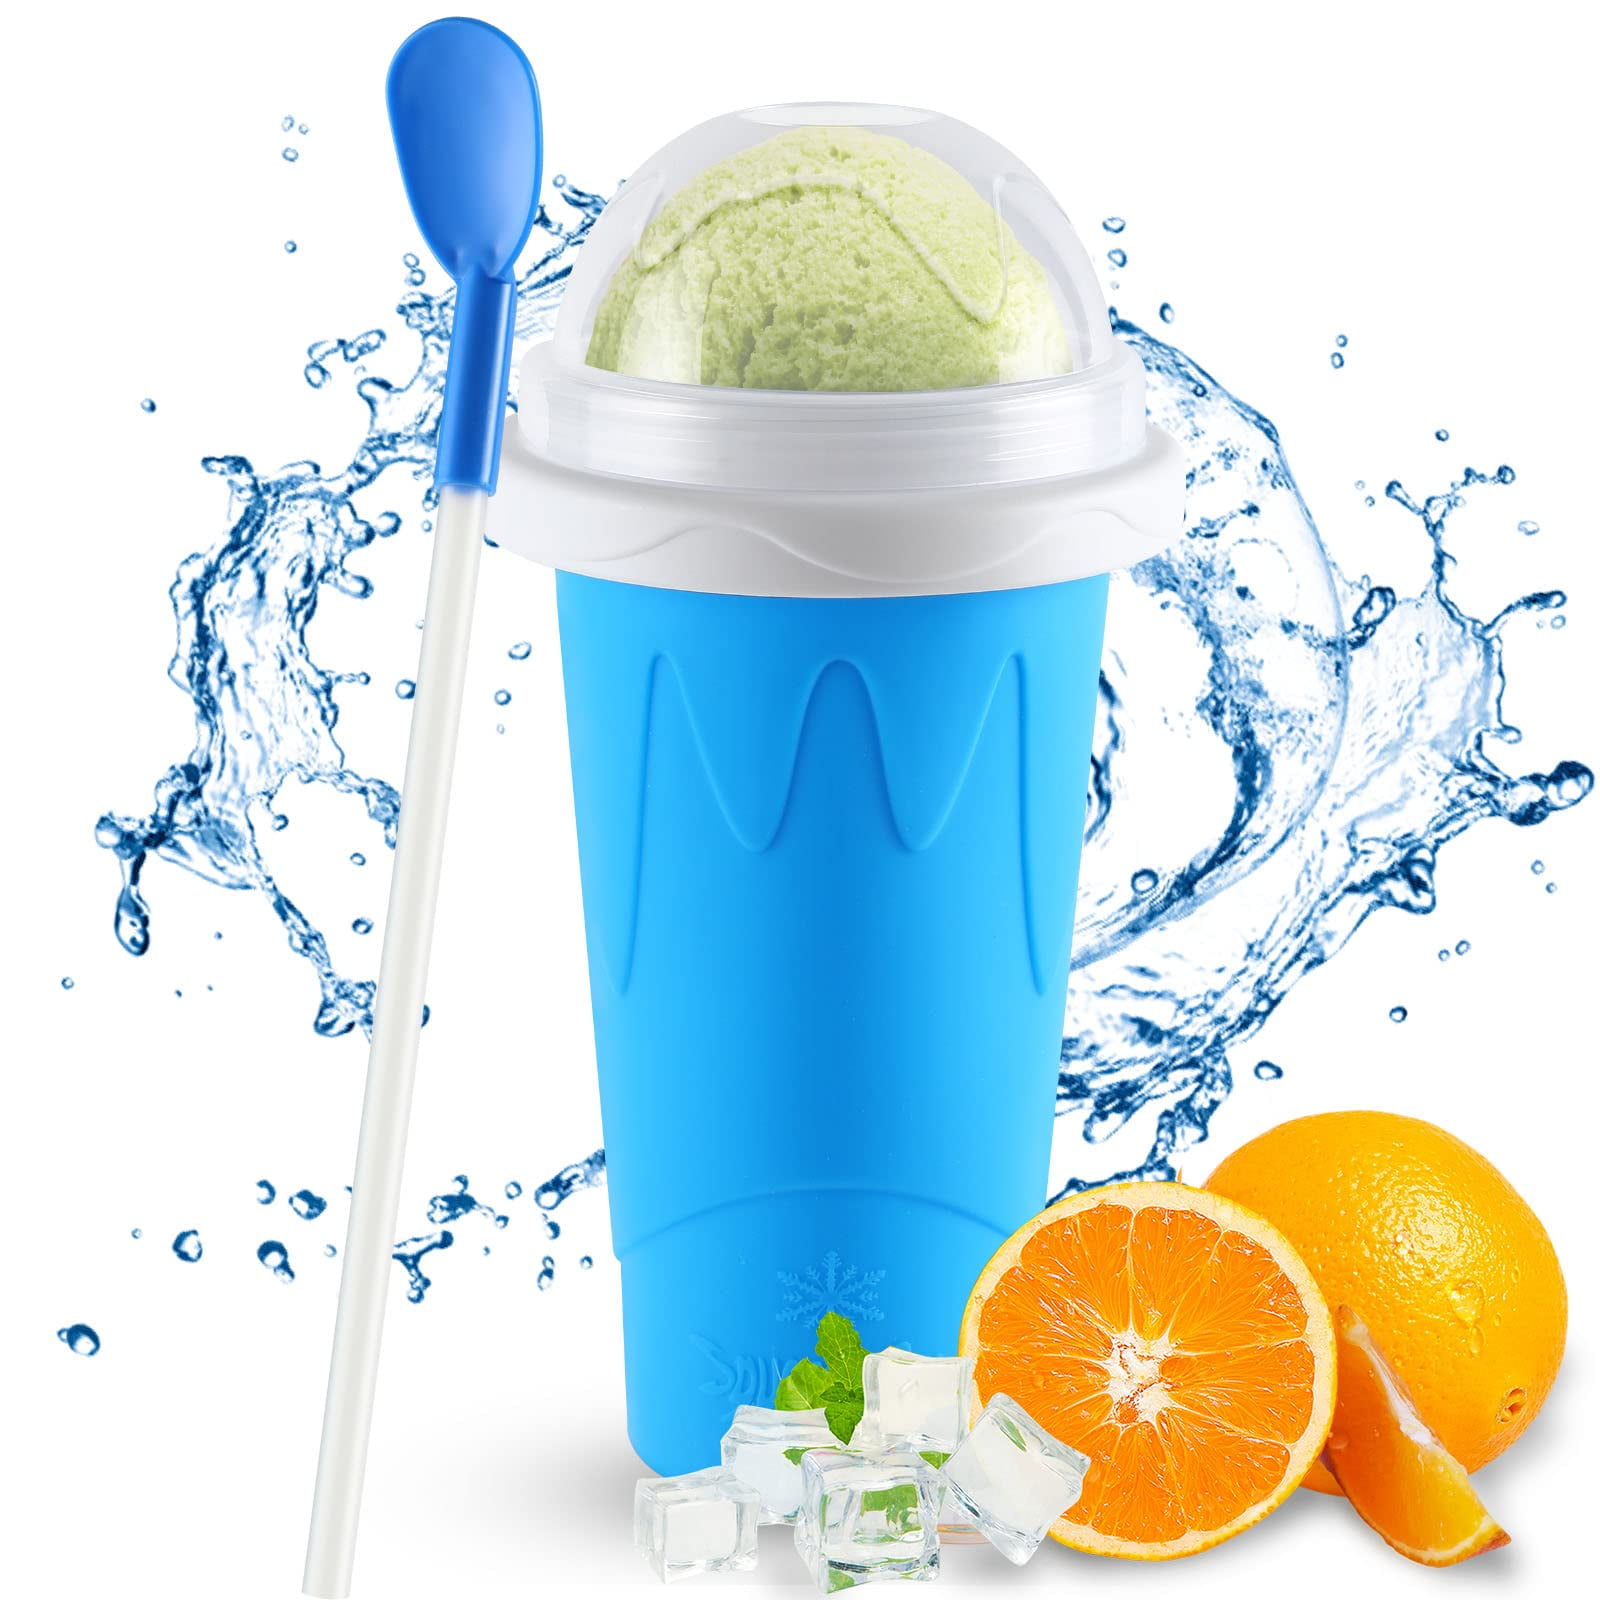  KTEBO Frozen Magic Slushy Cup, Smoothie Cups with Lids and  Straws, Slushie Maker Cup is Cool Stuff Things, Fasting Cooling Make  Milkshake smoothie Freeze Beer - TIKT0K Trend Items Cool Gadgets-Blue